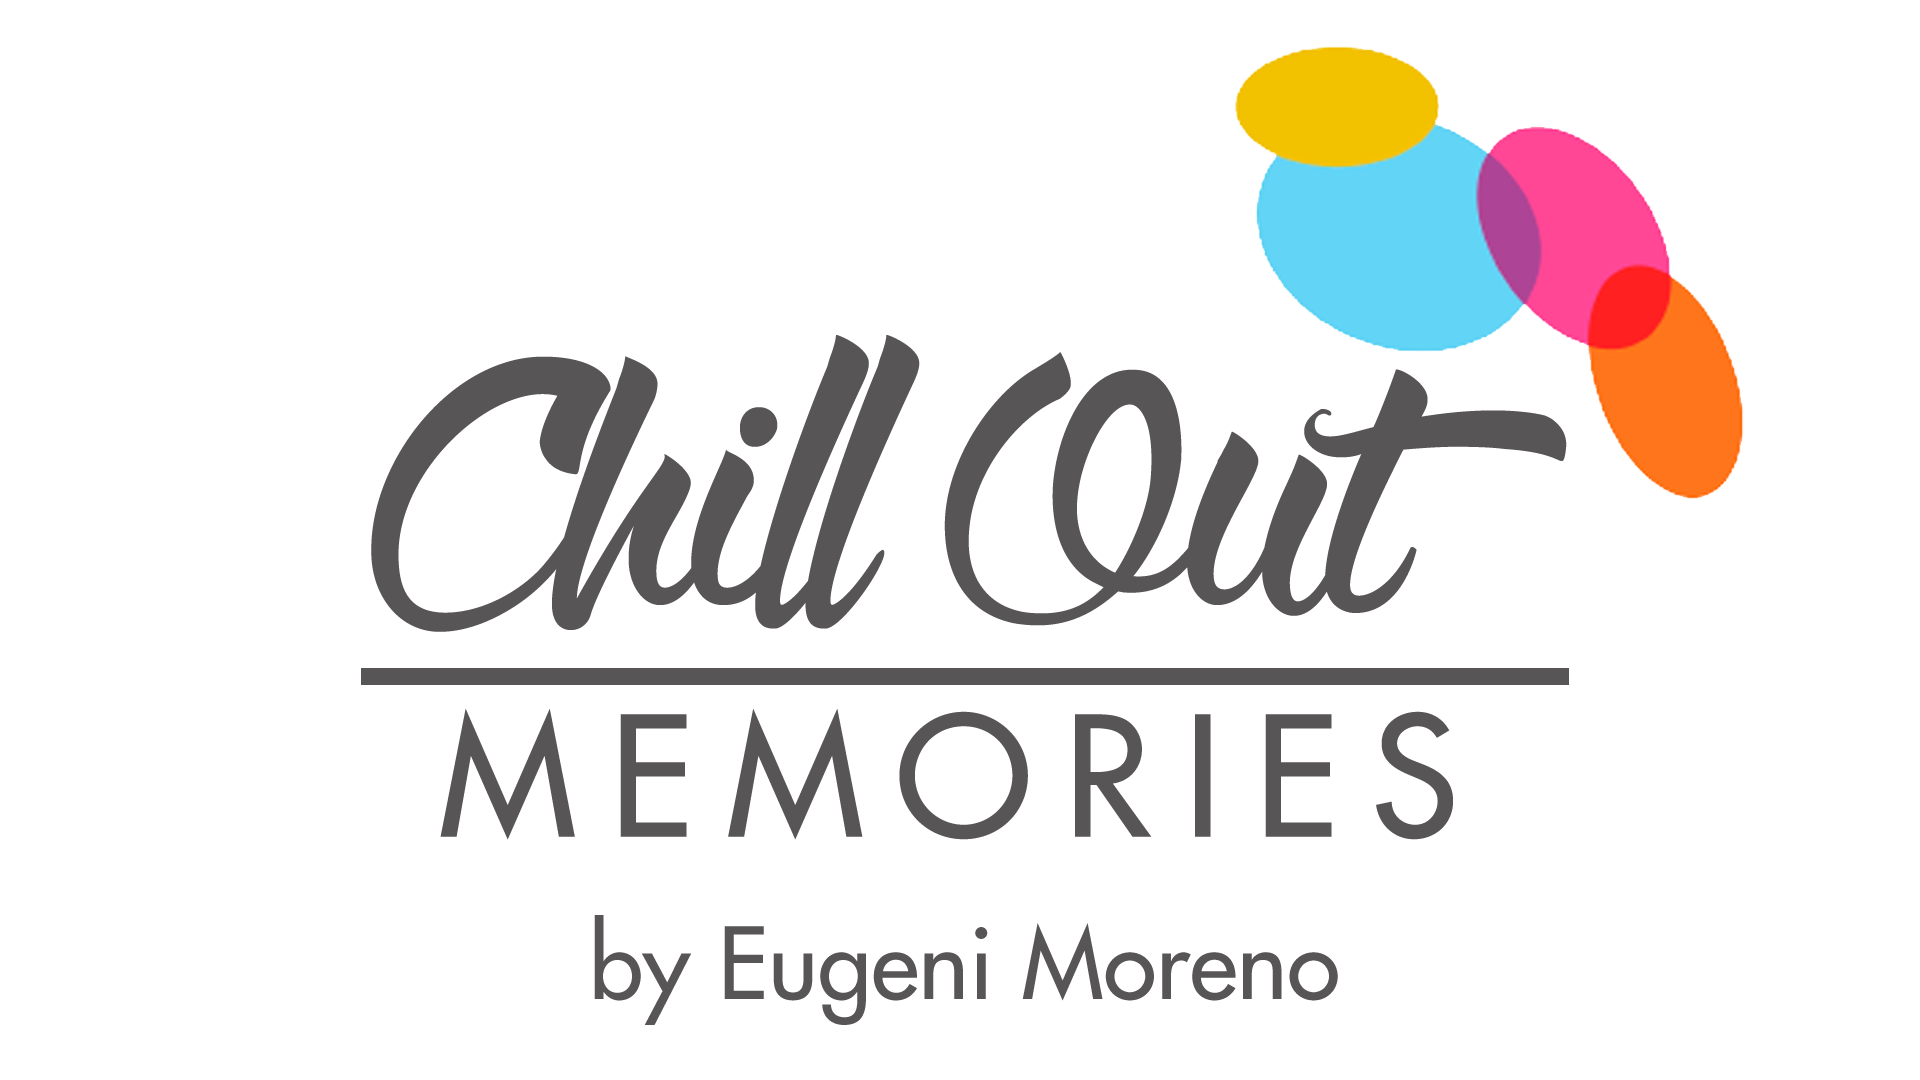 Chill Out Memories